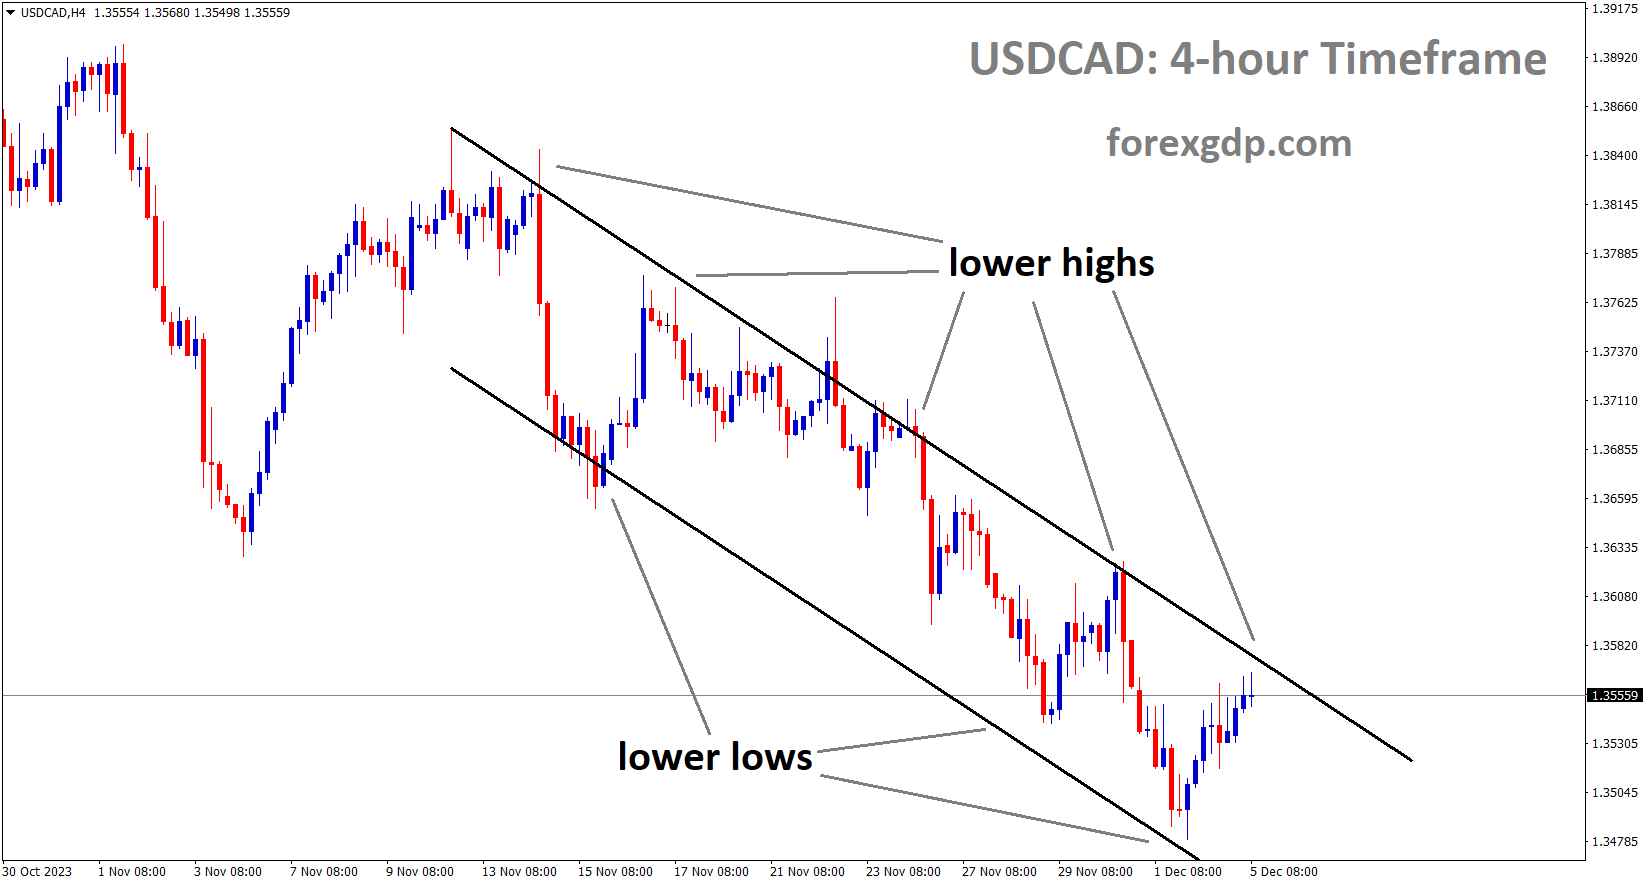 USDCAD is moving in the Descending channel and the market has reached the lower high area of the channel